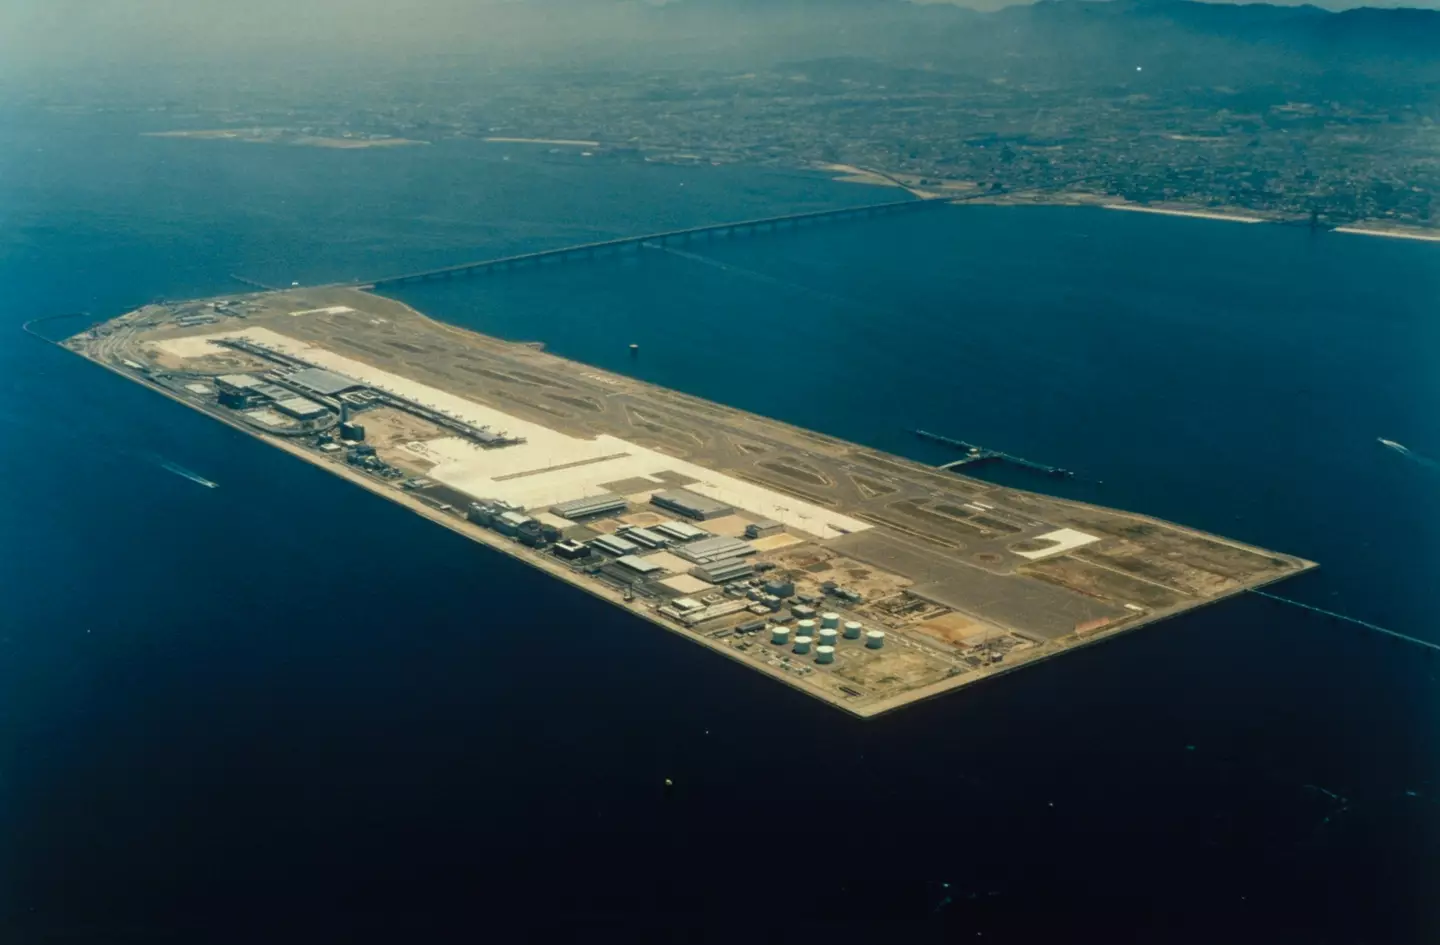 Kansai Airport is located in Japan.